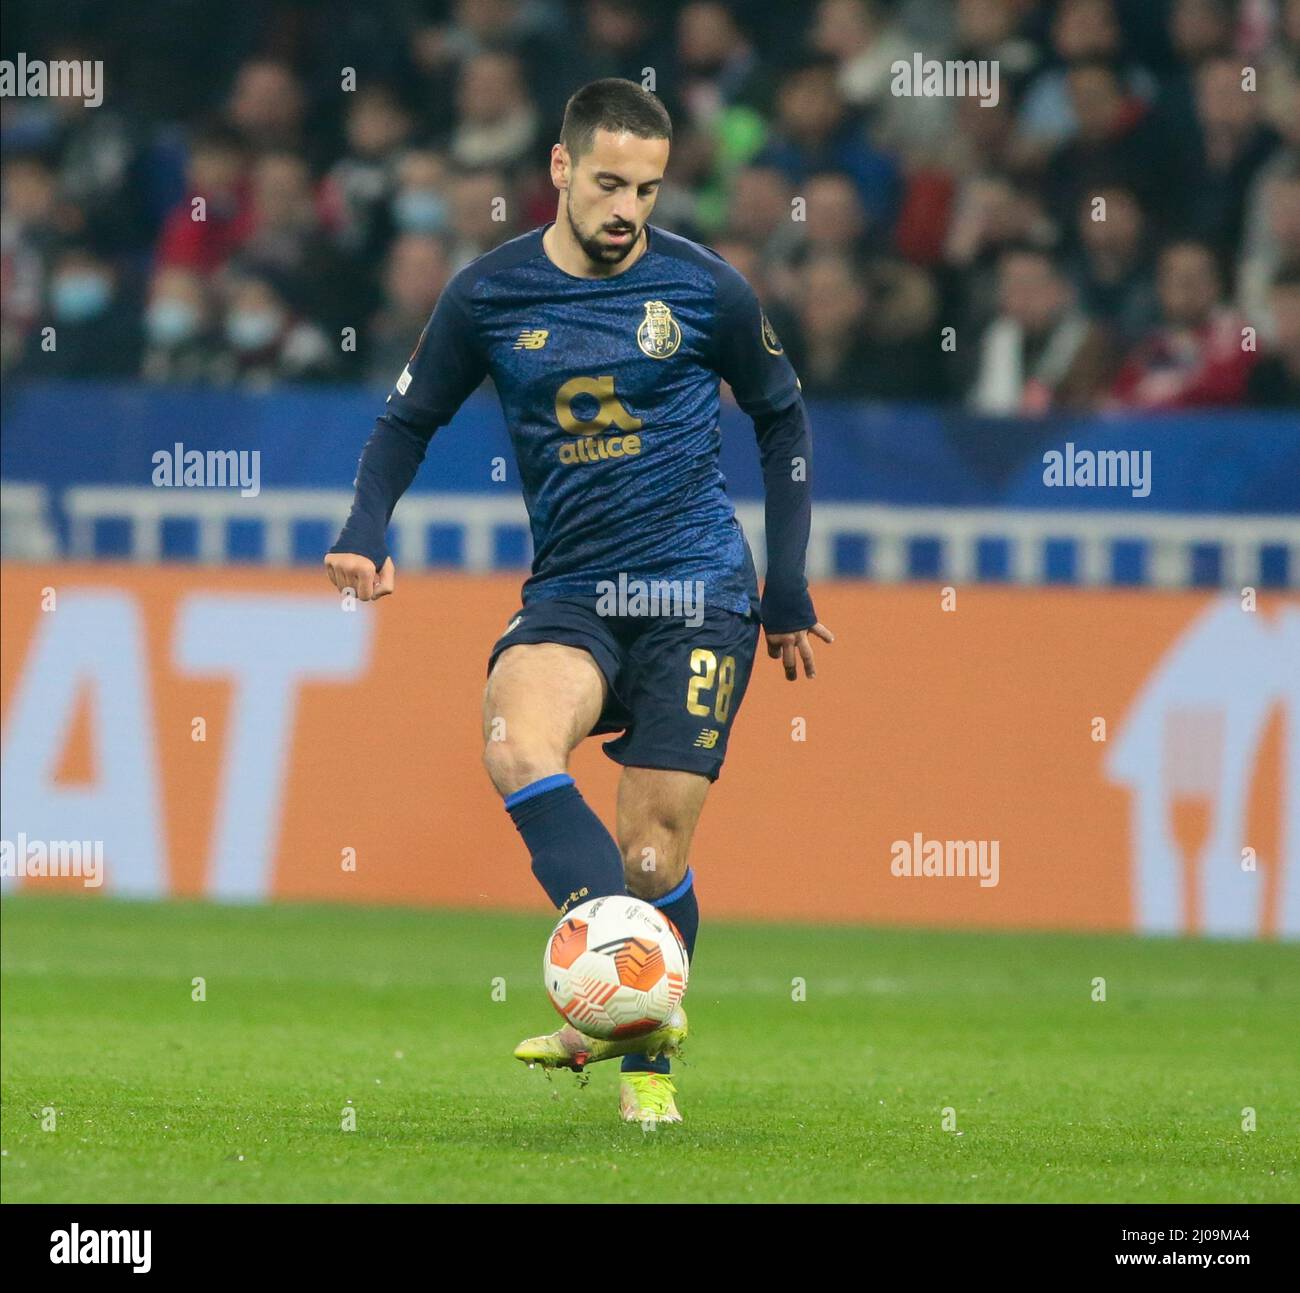 Lyon, France. 17th Mar, 2022. Bruno Costa of Fc Porto during the UEFA Europa League, Round of 16, 2nd leg football match between Olympique Lyonnais (Lyon) and FC Porto on March 17, 2022 at Groupama stadium in Decines-Charpieu near Lyon, France Credit: Live Media Publishing Group/Alamy Live News Stock Photo